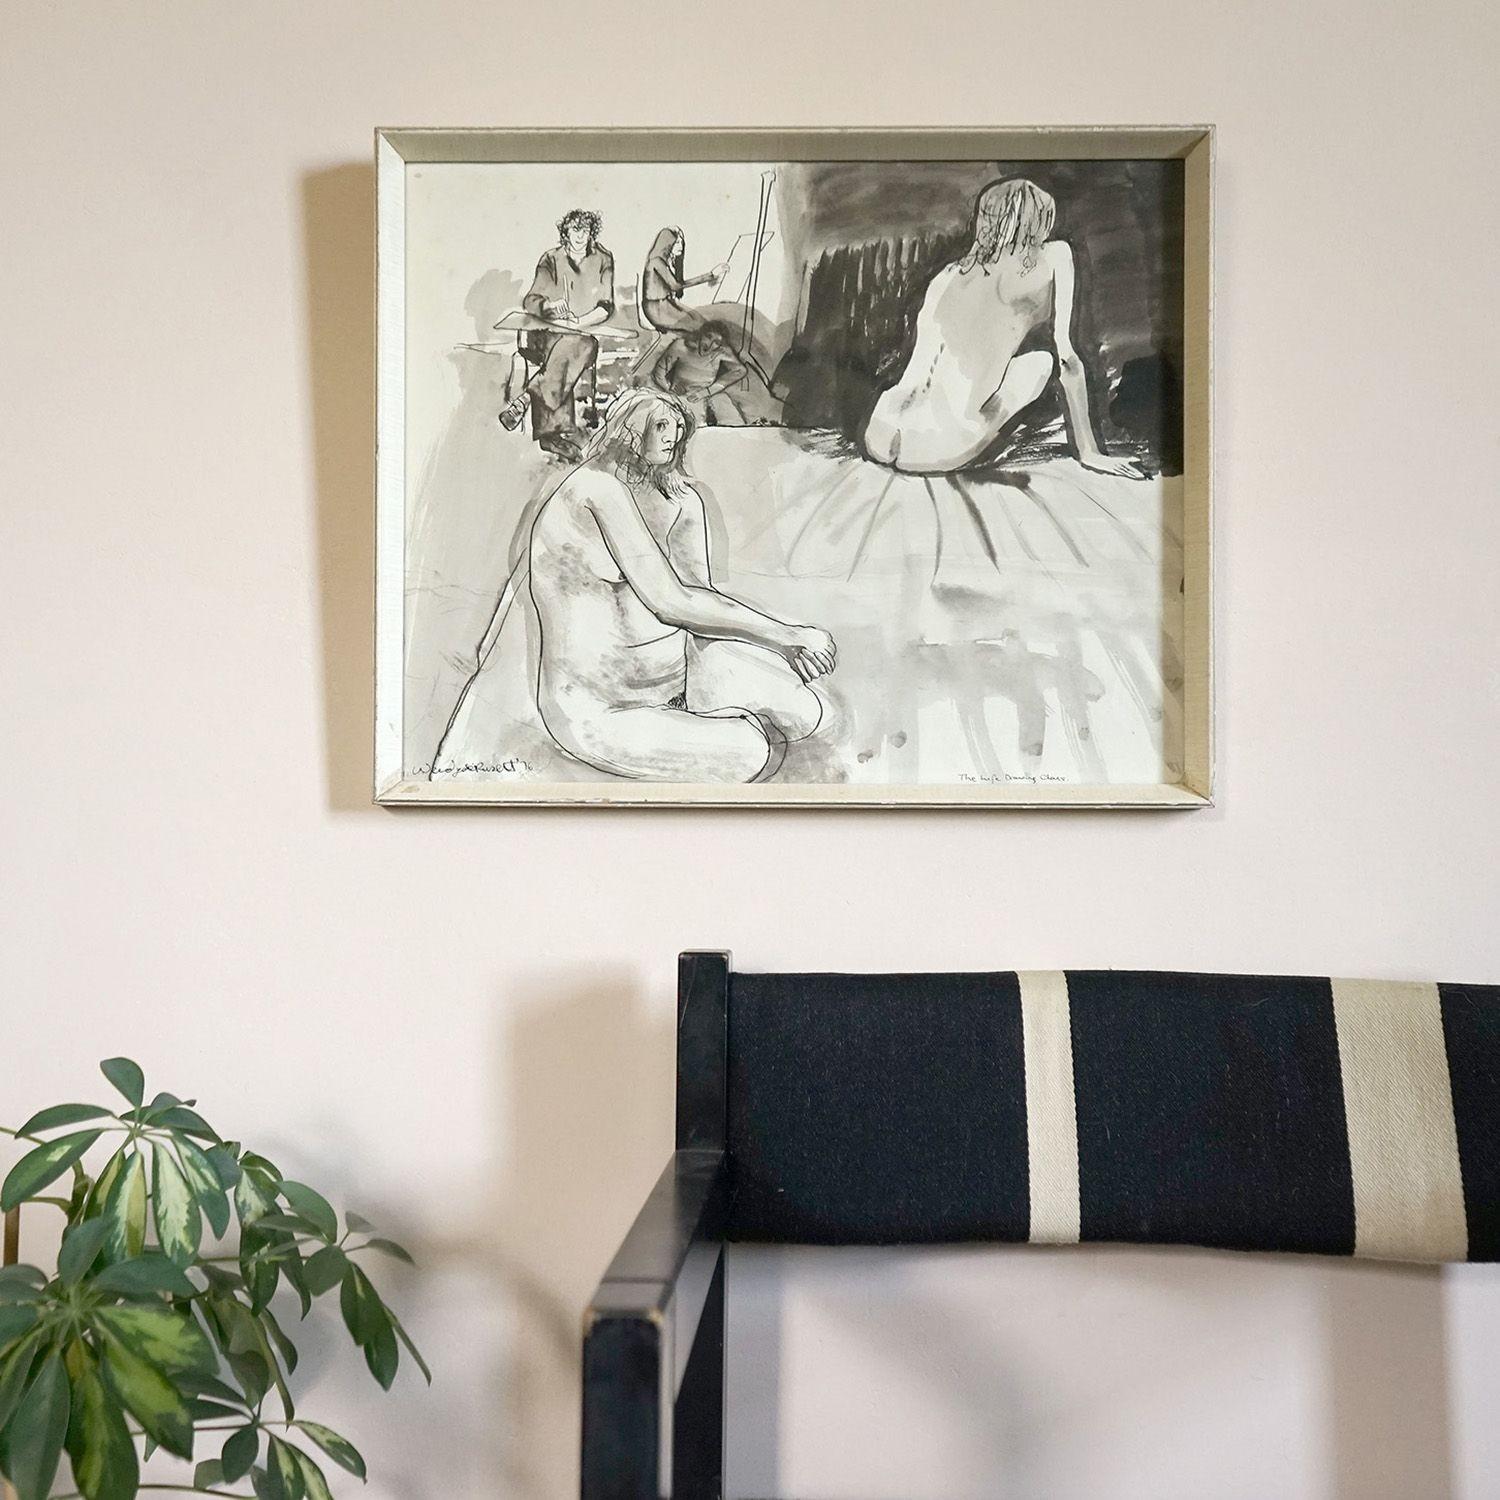 Paper Vintage Original 'Life Drawing' Nude Pen and Ink Wash by Wendy de Rusett, 1970s For Sale